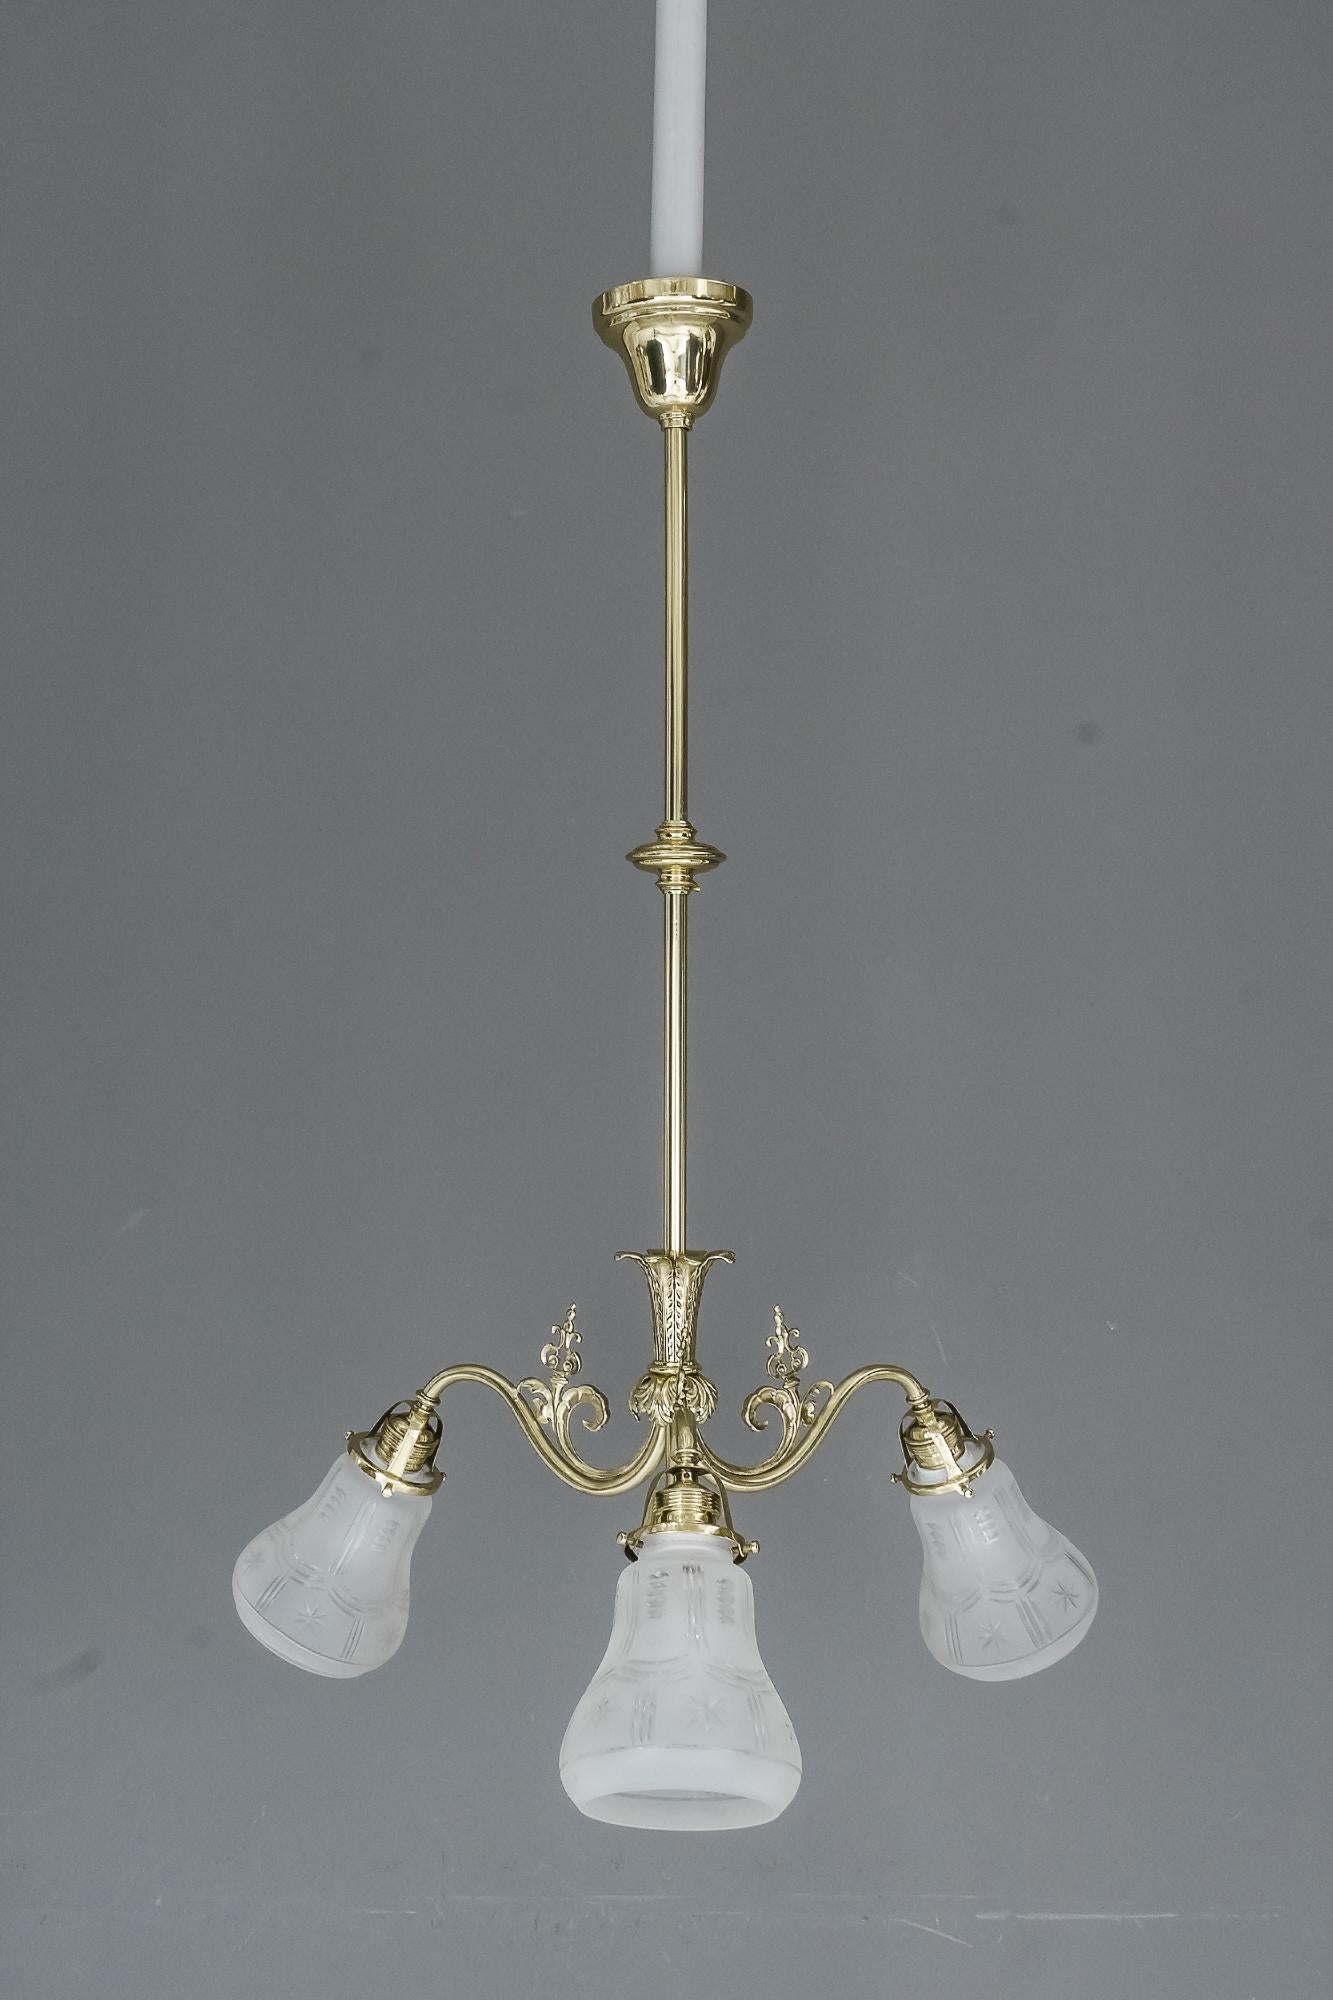 Historistic chandelier, Vienna, circa 1890s.
Brass polished and stove enameled
Original glass shades.